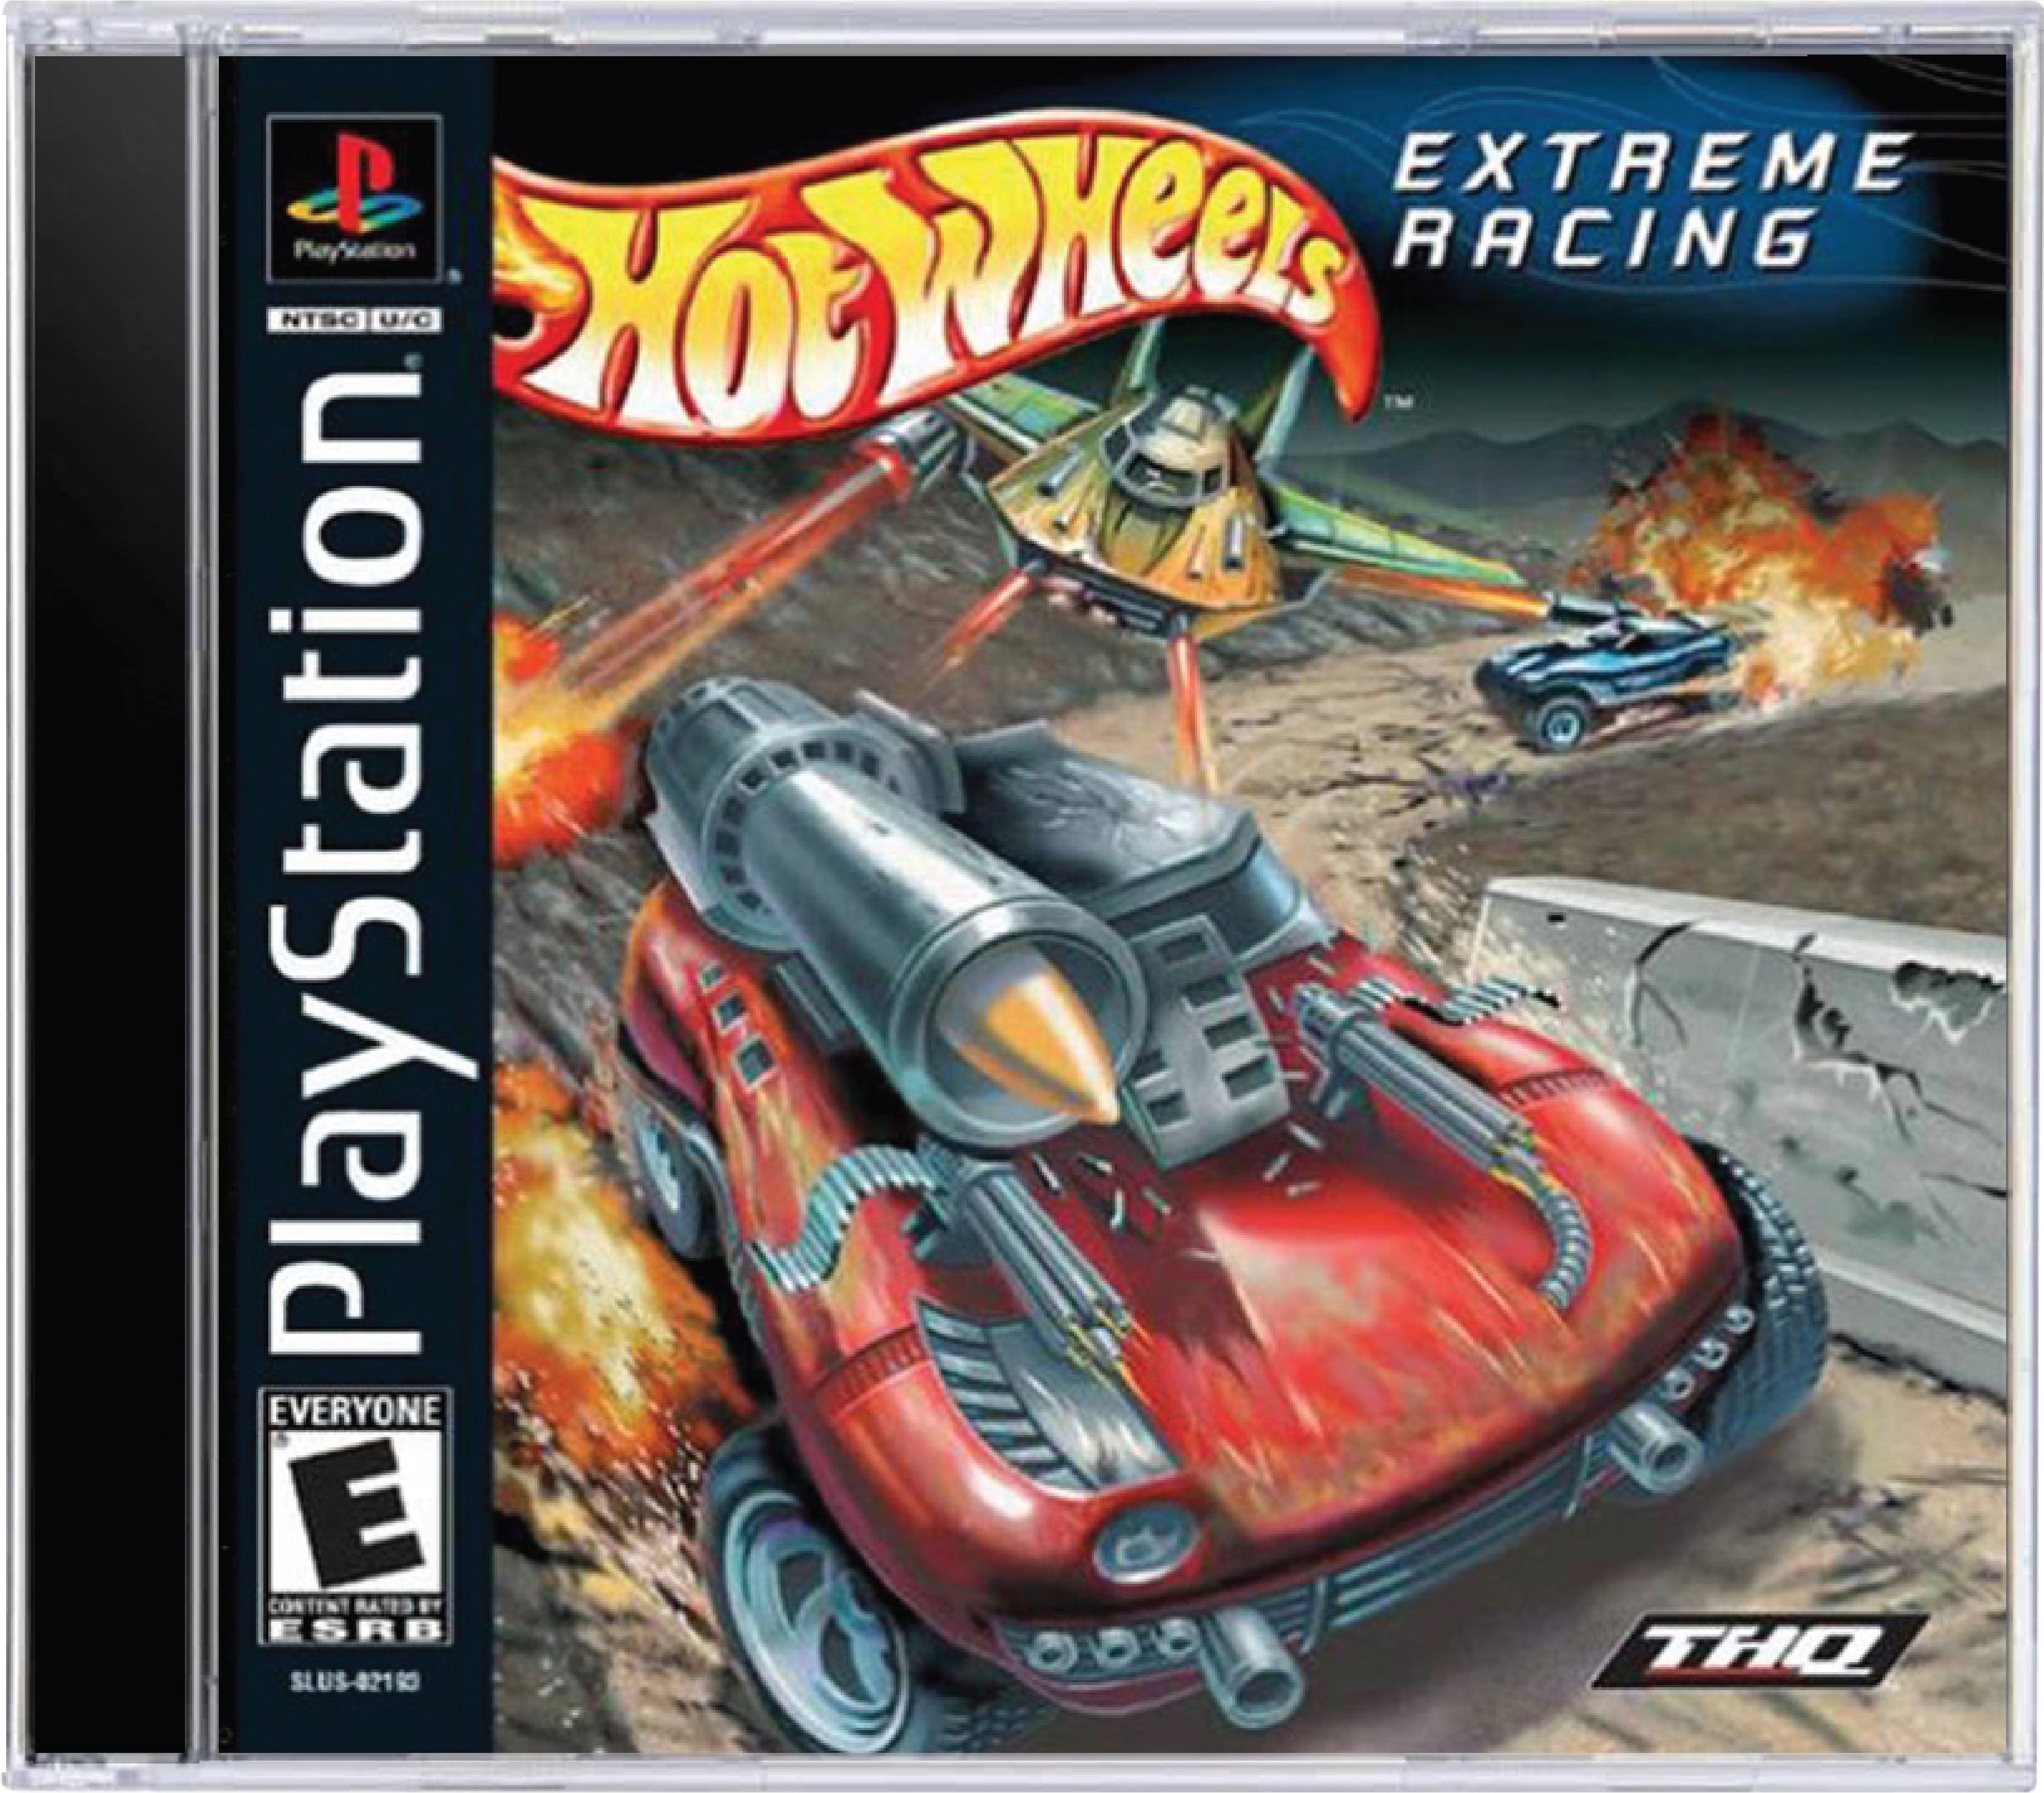 Hot Wheels Extreme Racing Cover Art and Product Photo